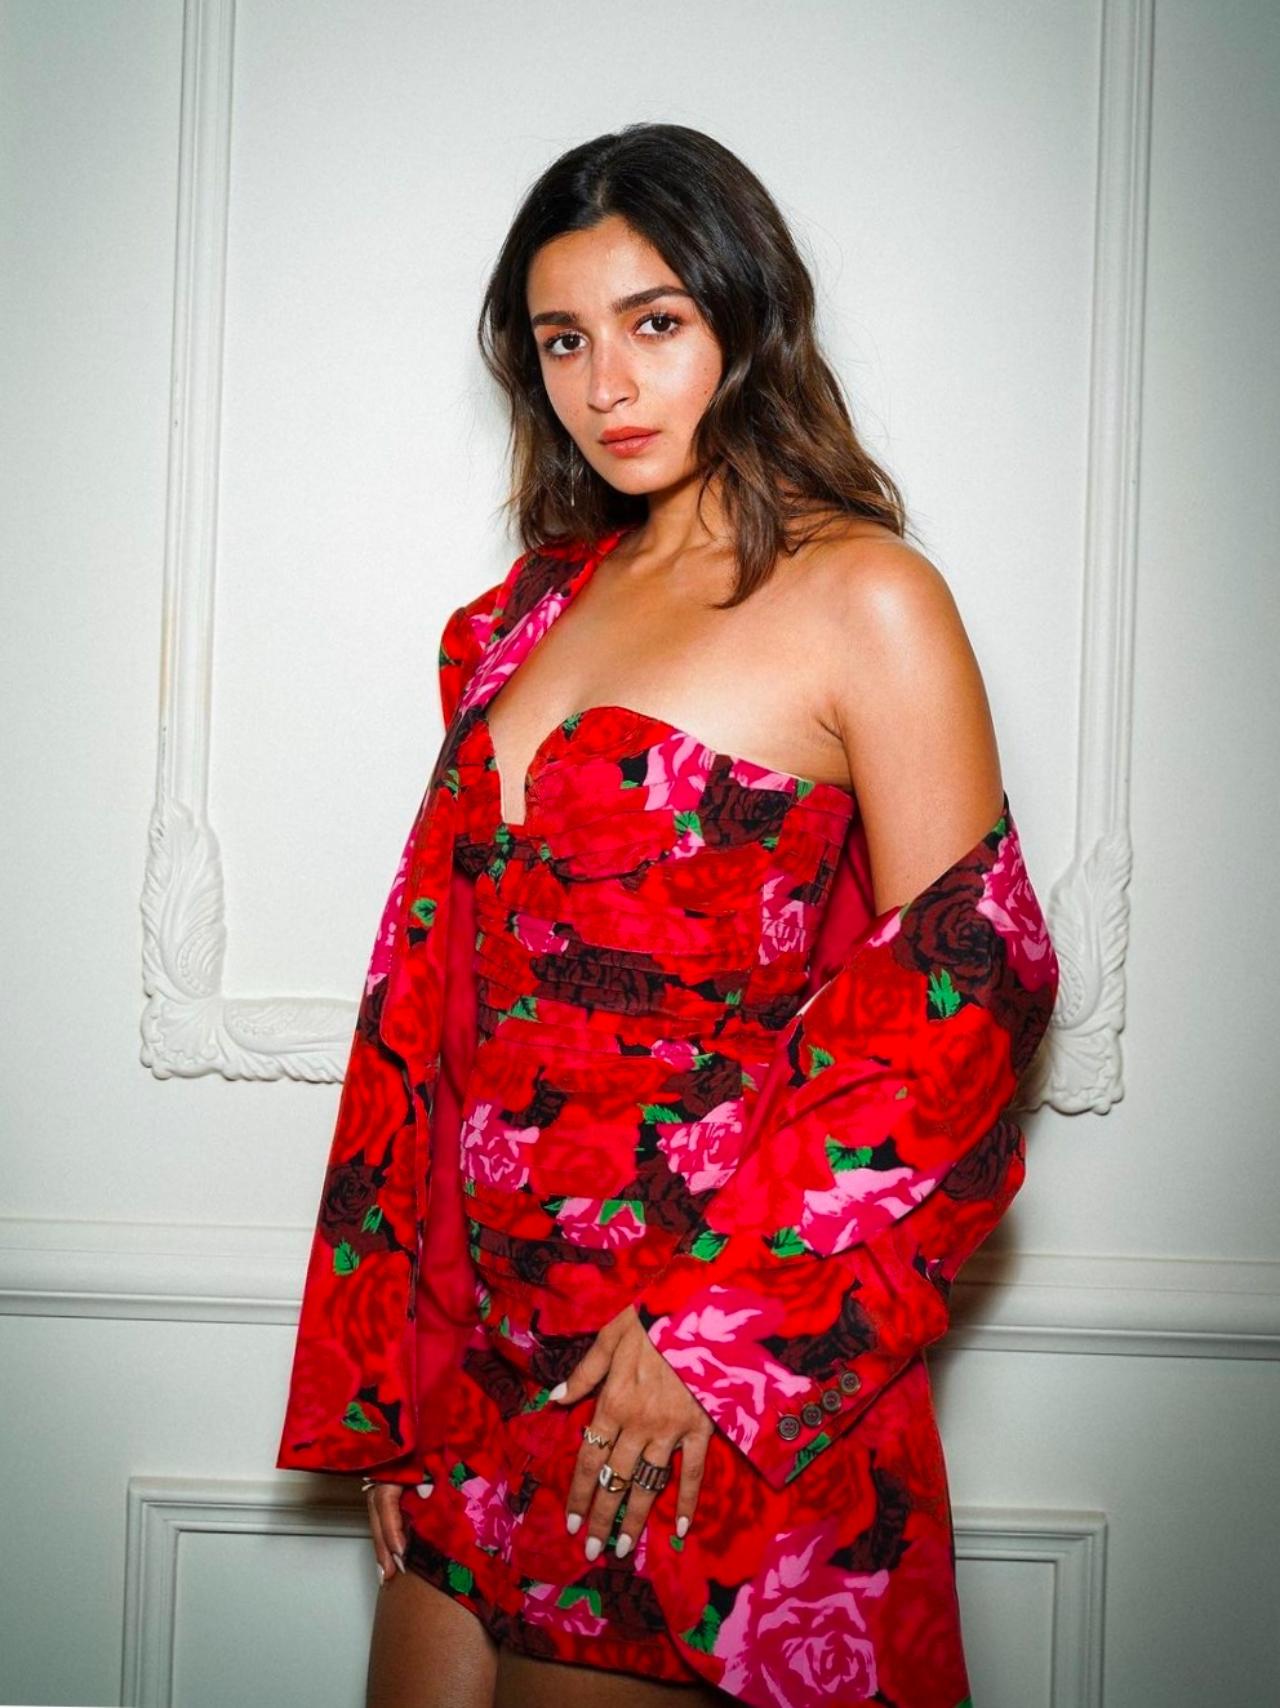 Seems like Alia Bhatt too has a knack for business. She has recently announced her investment in 'Phool.co', an IIT Kanpur-based company. It is focused on the circular economy which converts floral waste into charcoal-free luxury incense products and other wellness products. She has also started her Production house named 'Eternal Sunshine Productions' and her first film under the banner, Darlings, will be released on Netflix in August, 2022. She also founded the sustainable clothing brand Eda-a-mamma